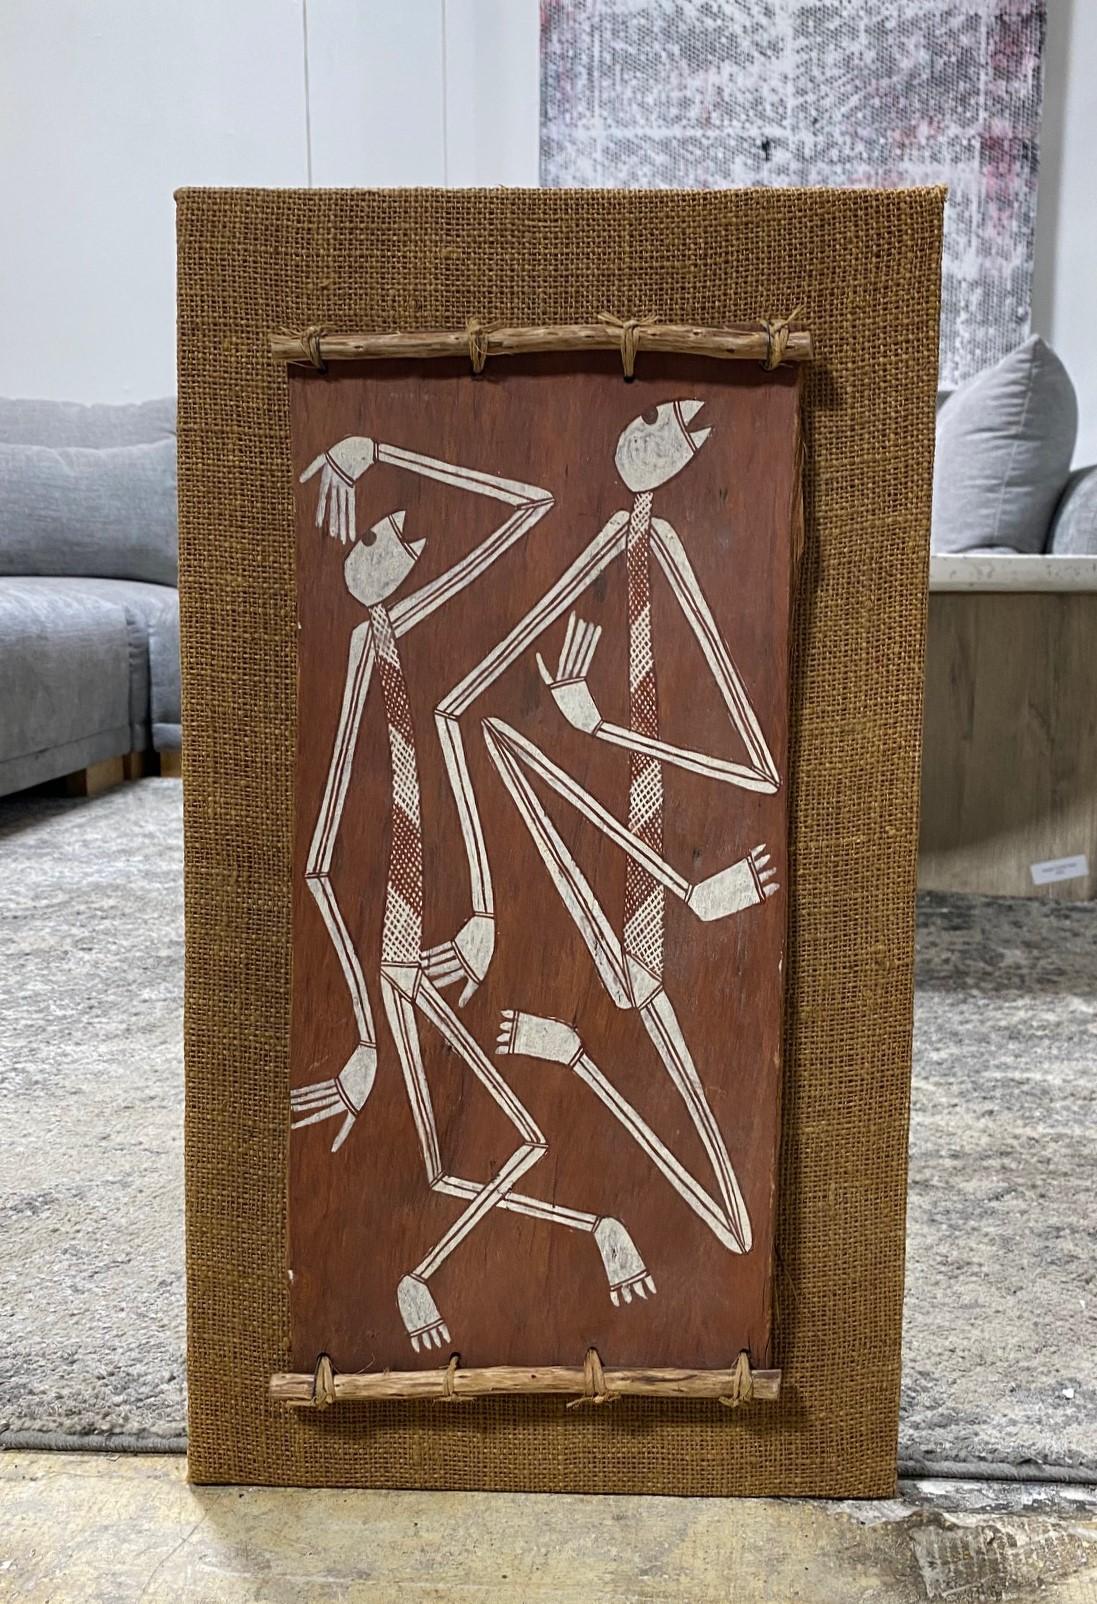 A wonderful, unique, and very engaging original indigenous painting by Australian Aboriginal artist Thompson Yulidjirri, (C1930-2009) featuring two Mimi figures. The painting is made with natural earth pigments on eucalyptus bark and affixed to a